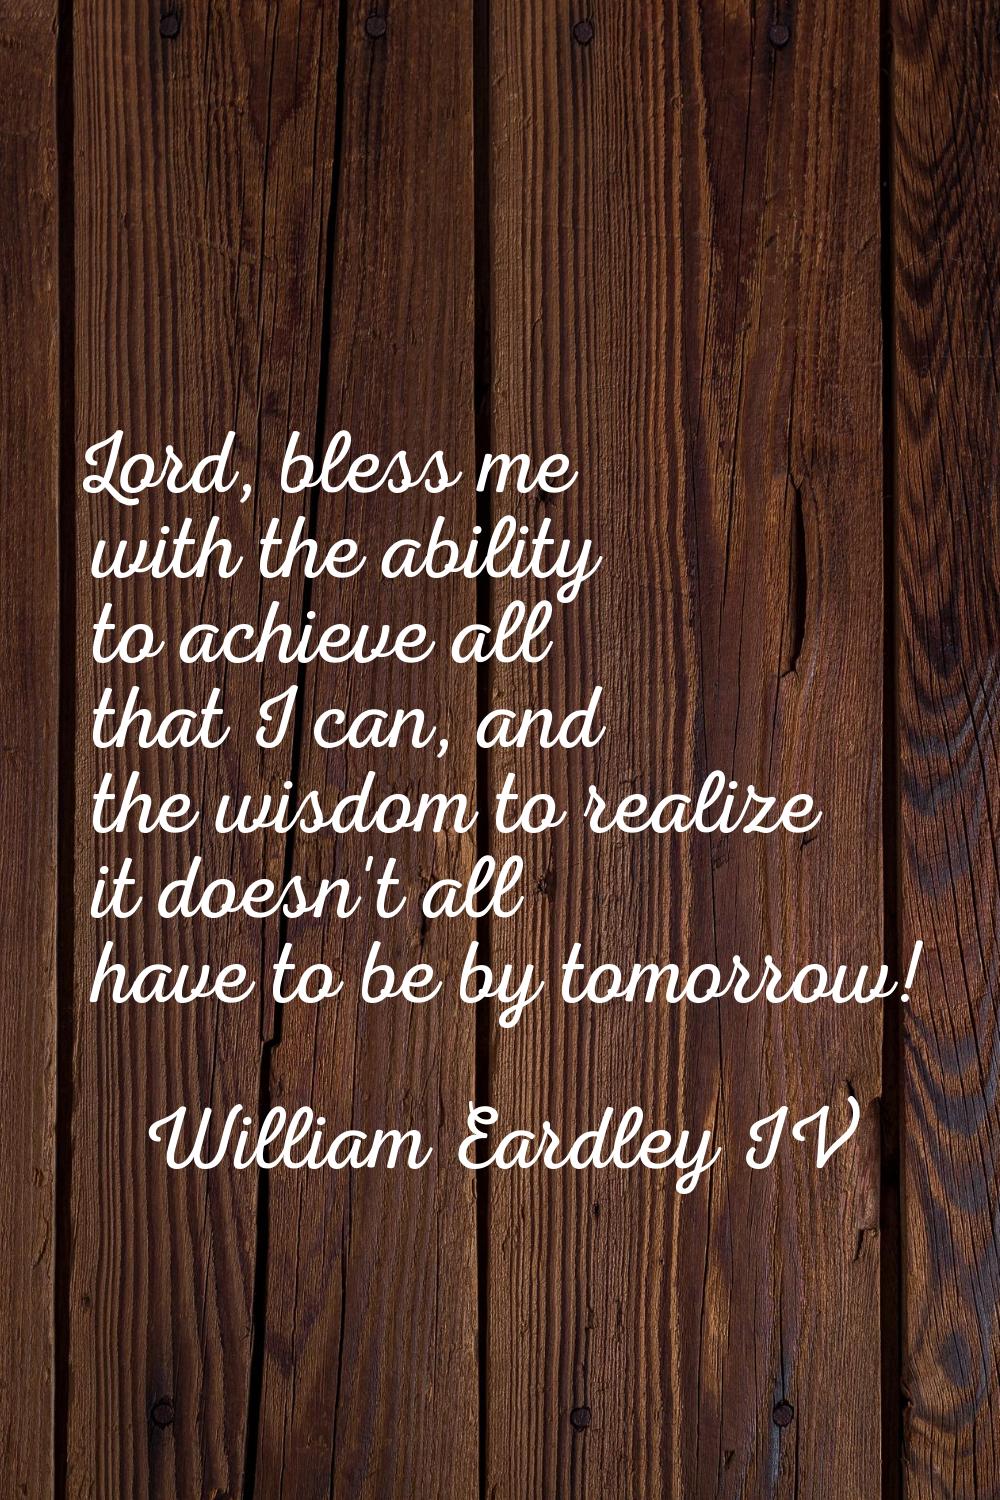 Lord, bless me with the ability to achieve all that I can, and the wisdom to realize it doesn't all